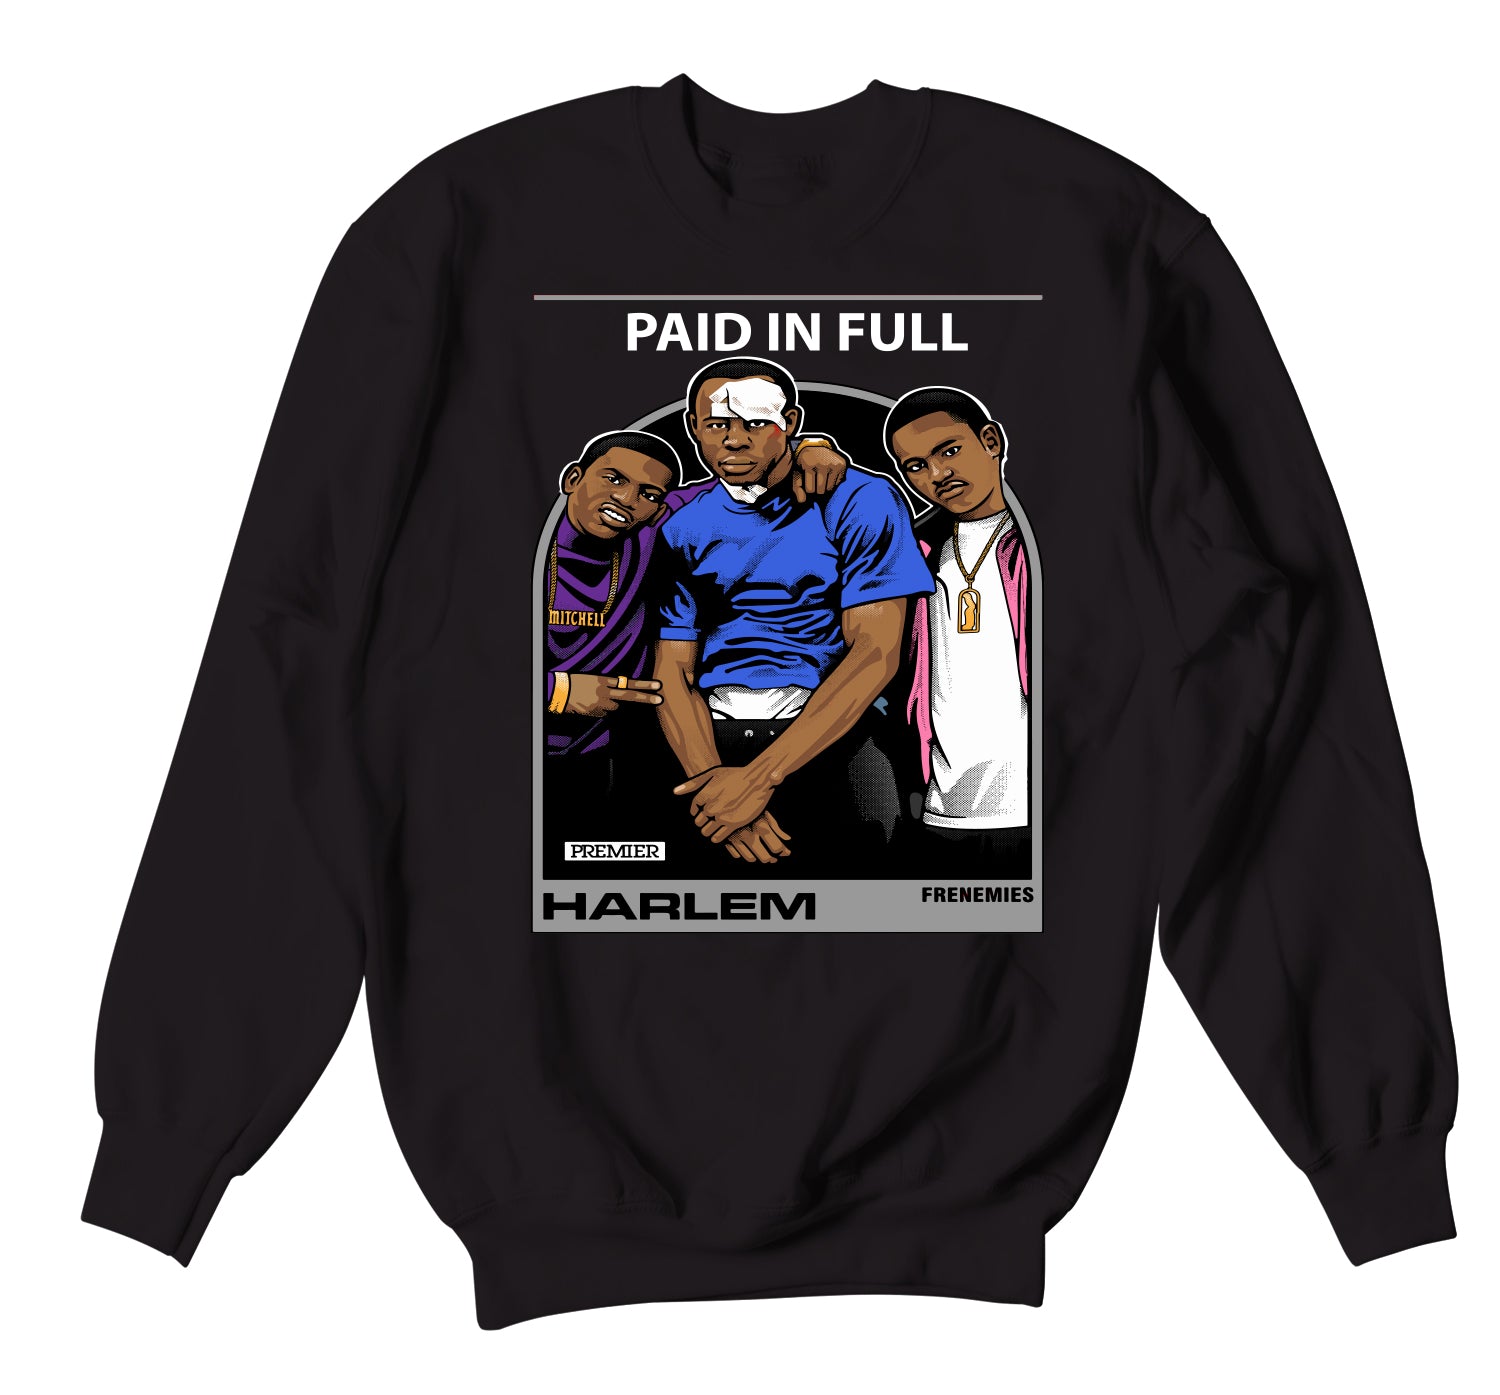 crew necks fro men designed to match the foamposite gradient sole collection 